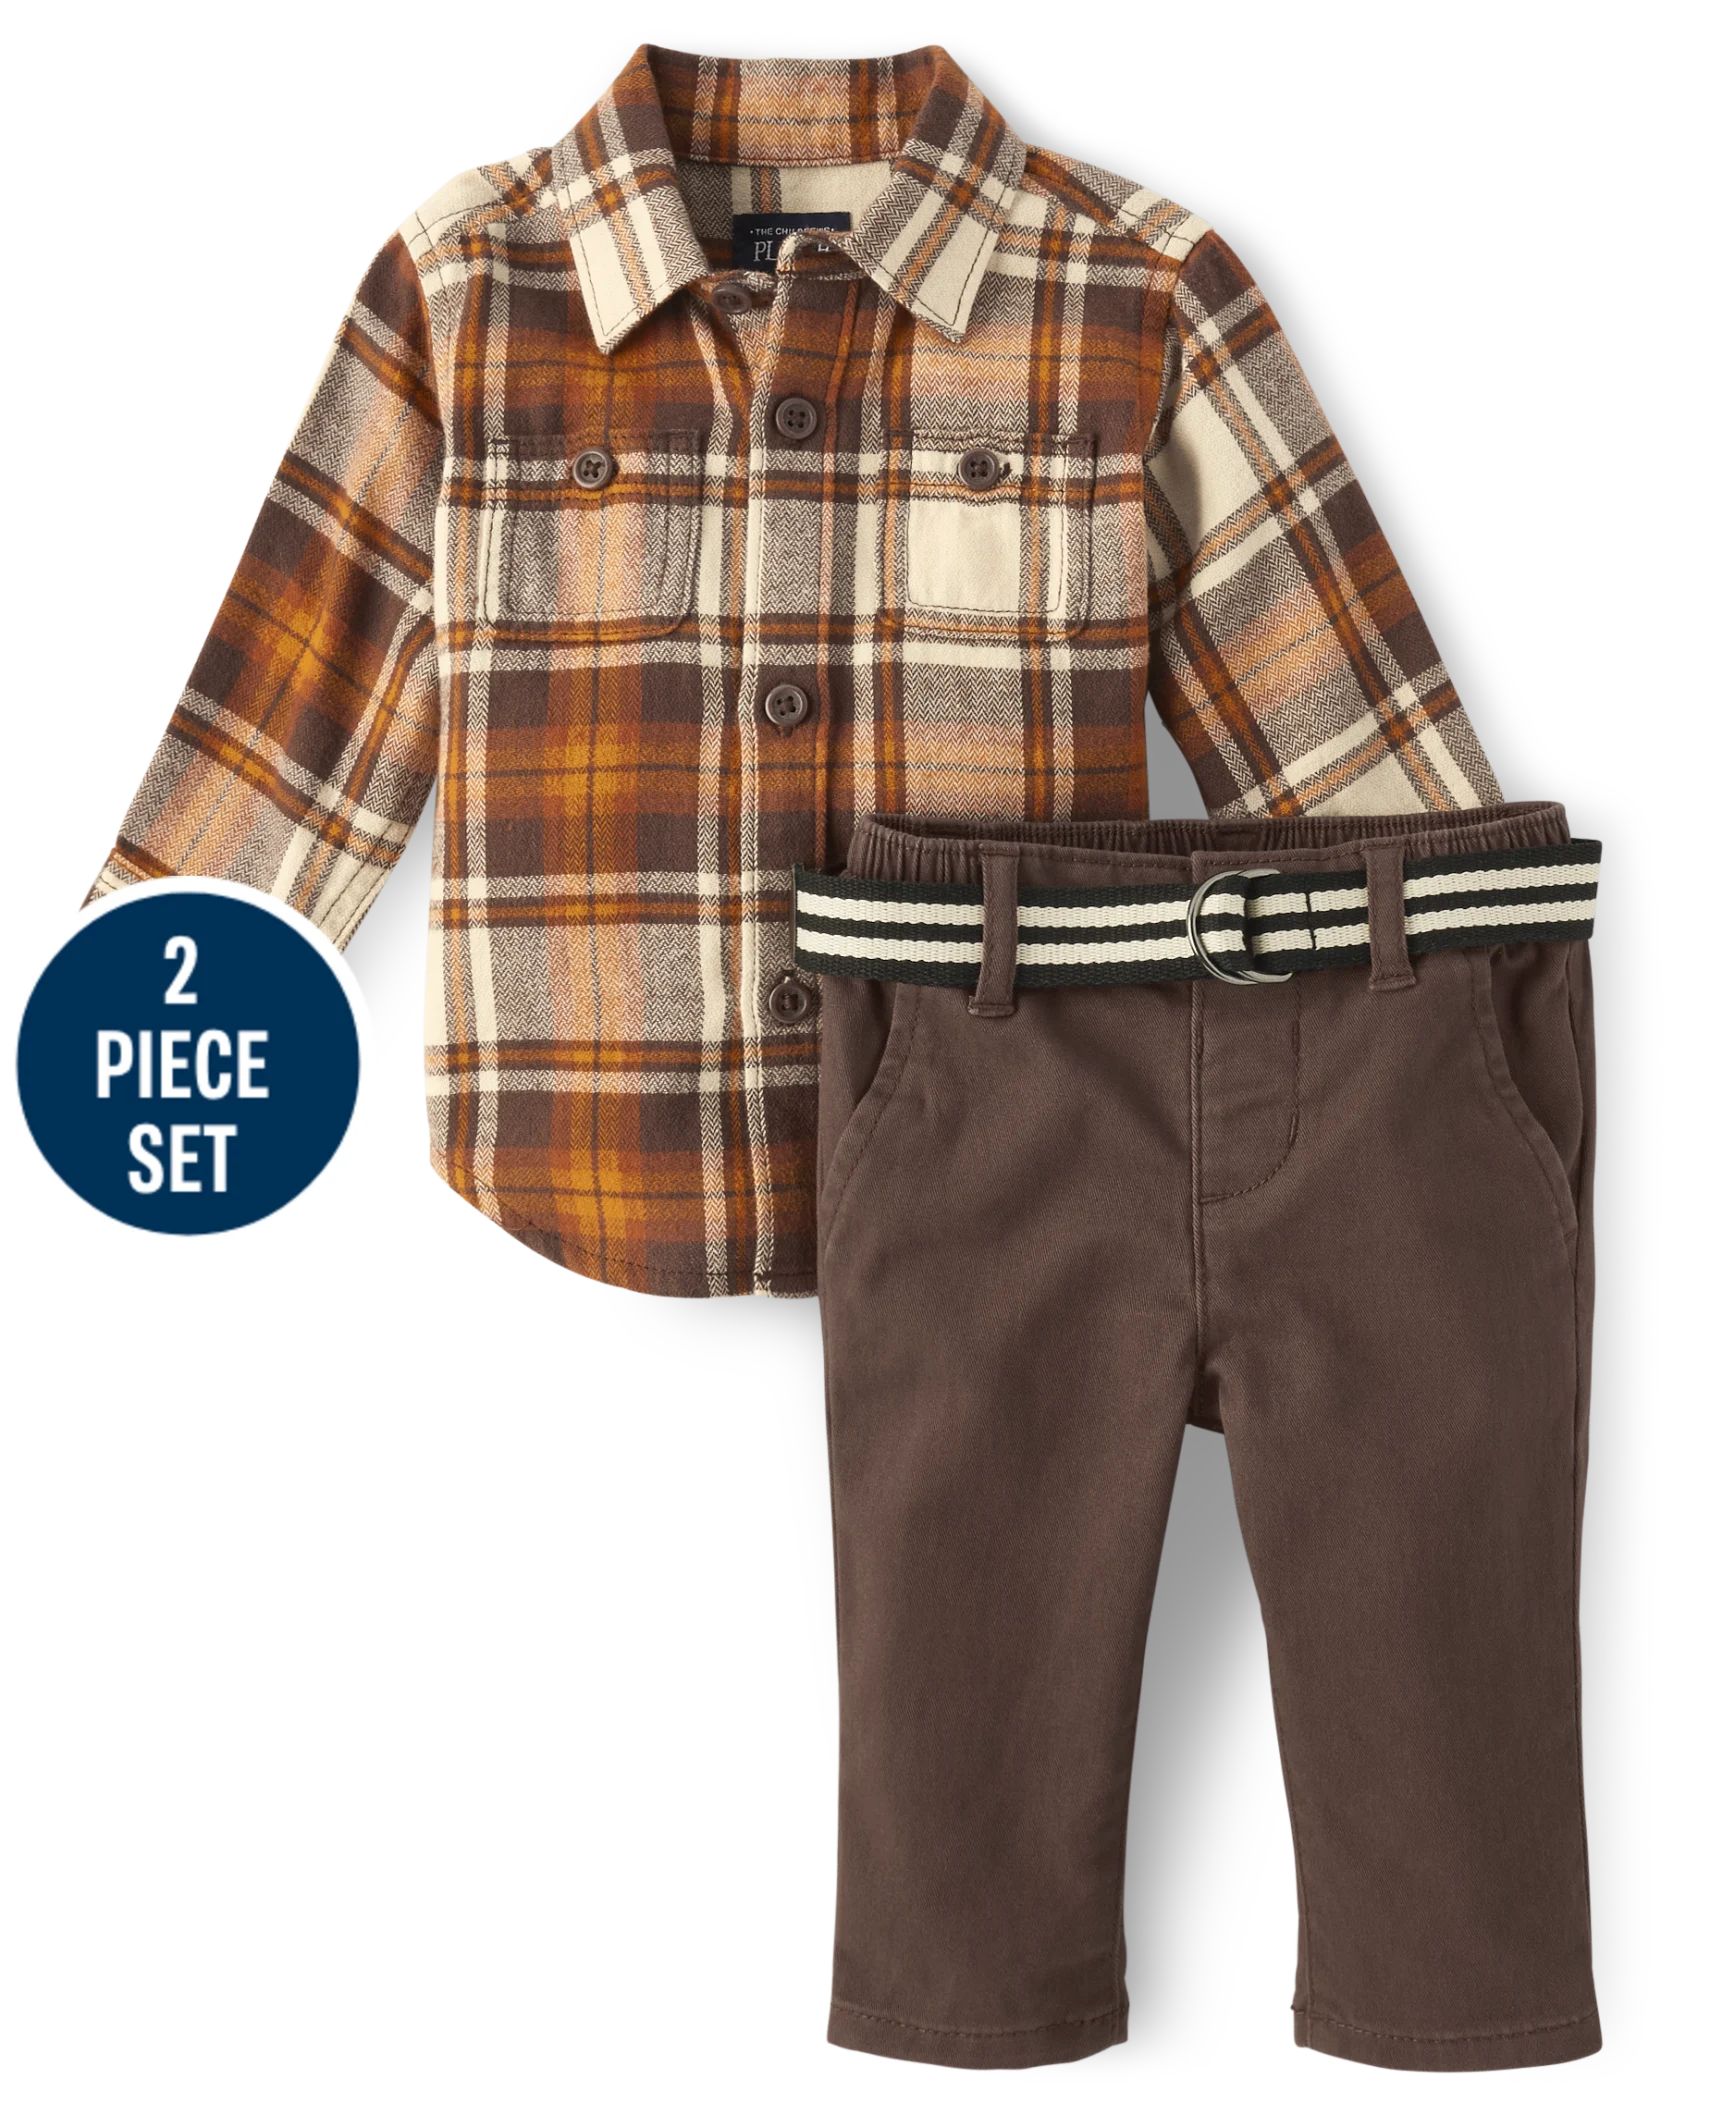 Baby Boys Matching Family Plaid 2-Piece Outfit Set - hay stack | The Children's Place